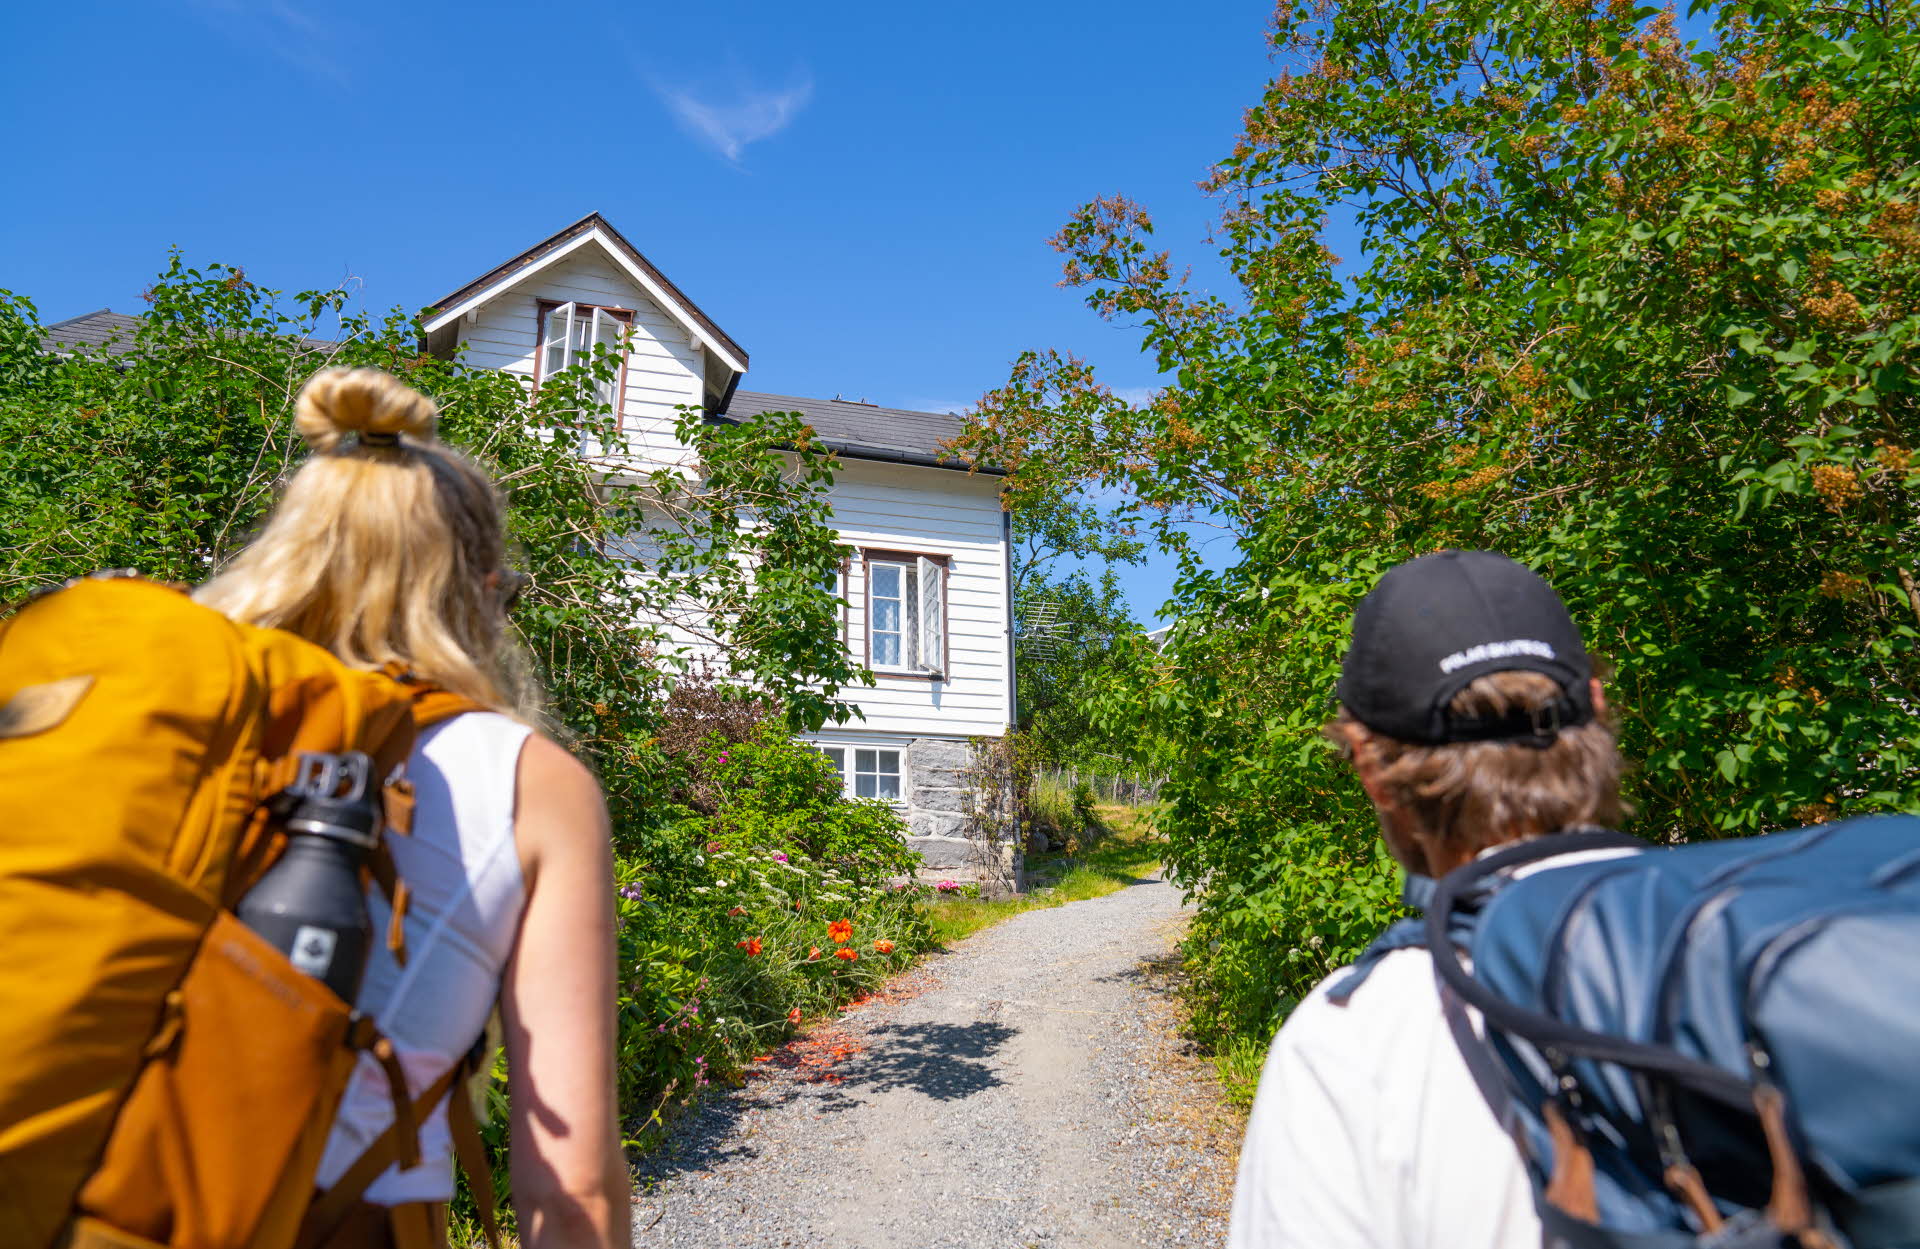 A man and a woman wearing backpacks looking at an old house in Geiranger